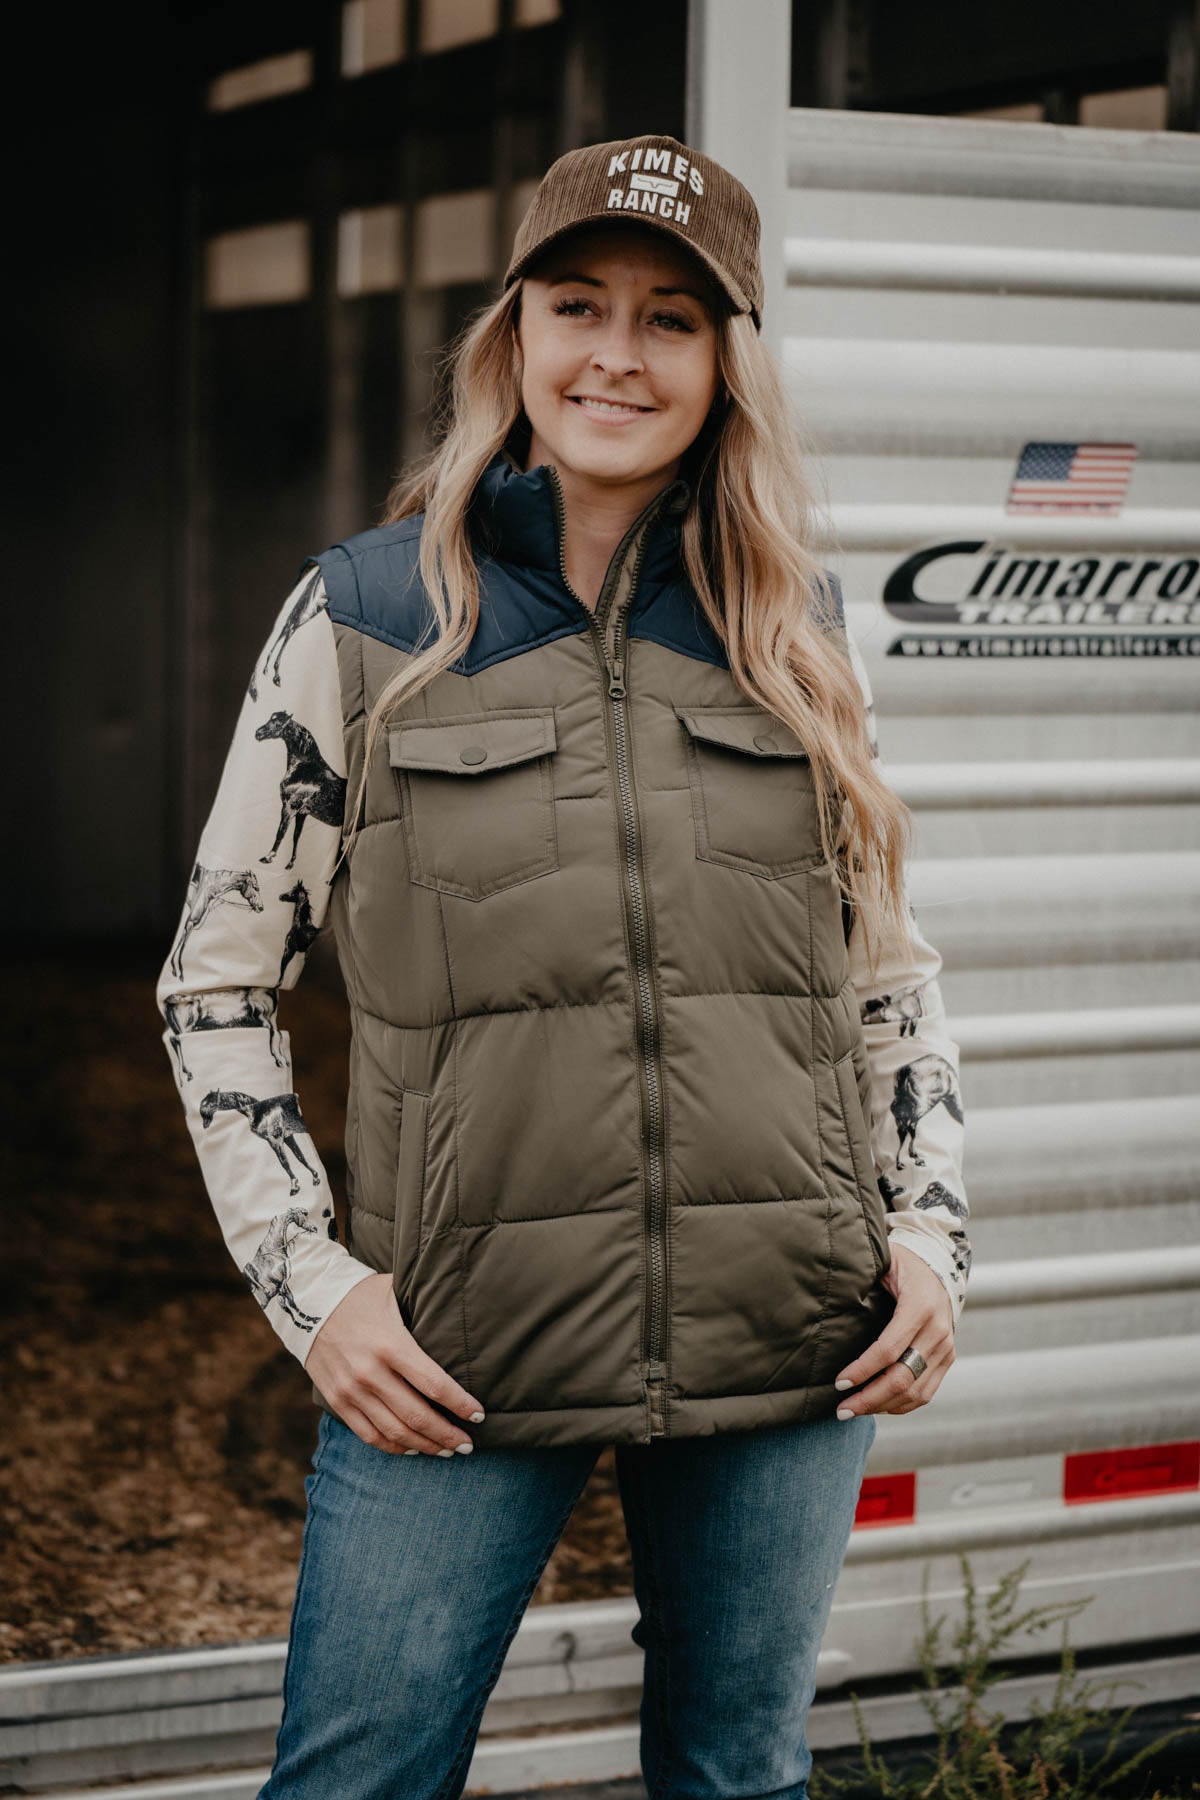 'Wildfyre' Womens VEST by Kimes Ranch (1 S, 1XL Only)